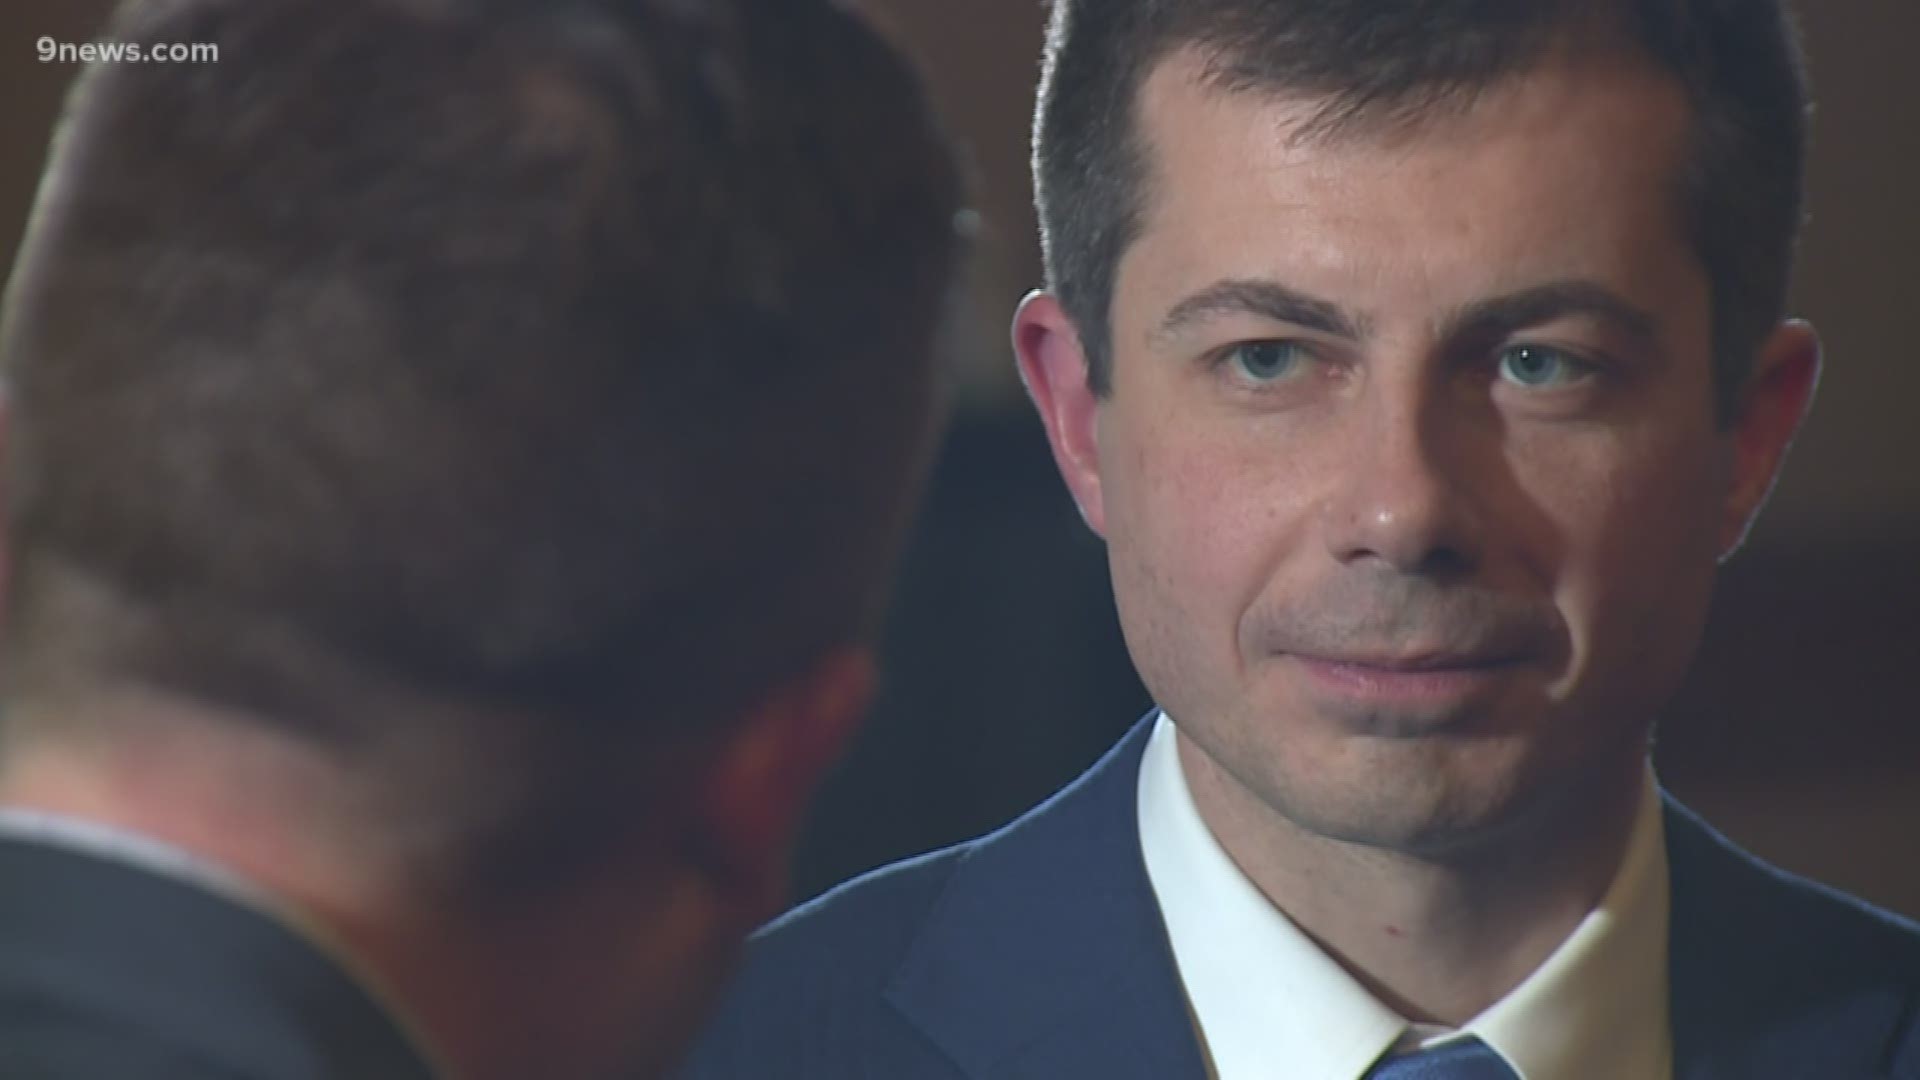 Mayor Buttigieg spoke to thousands of Coloradans after the Nevada Caucus and a young man looked to Buttigieg for advice.